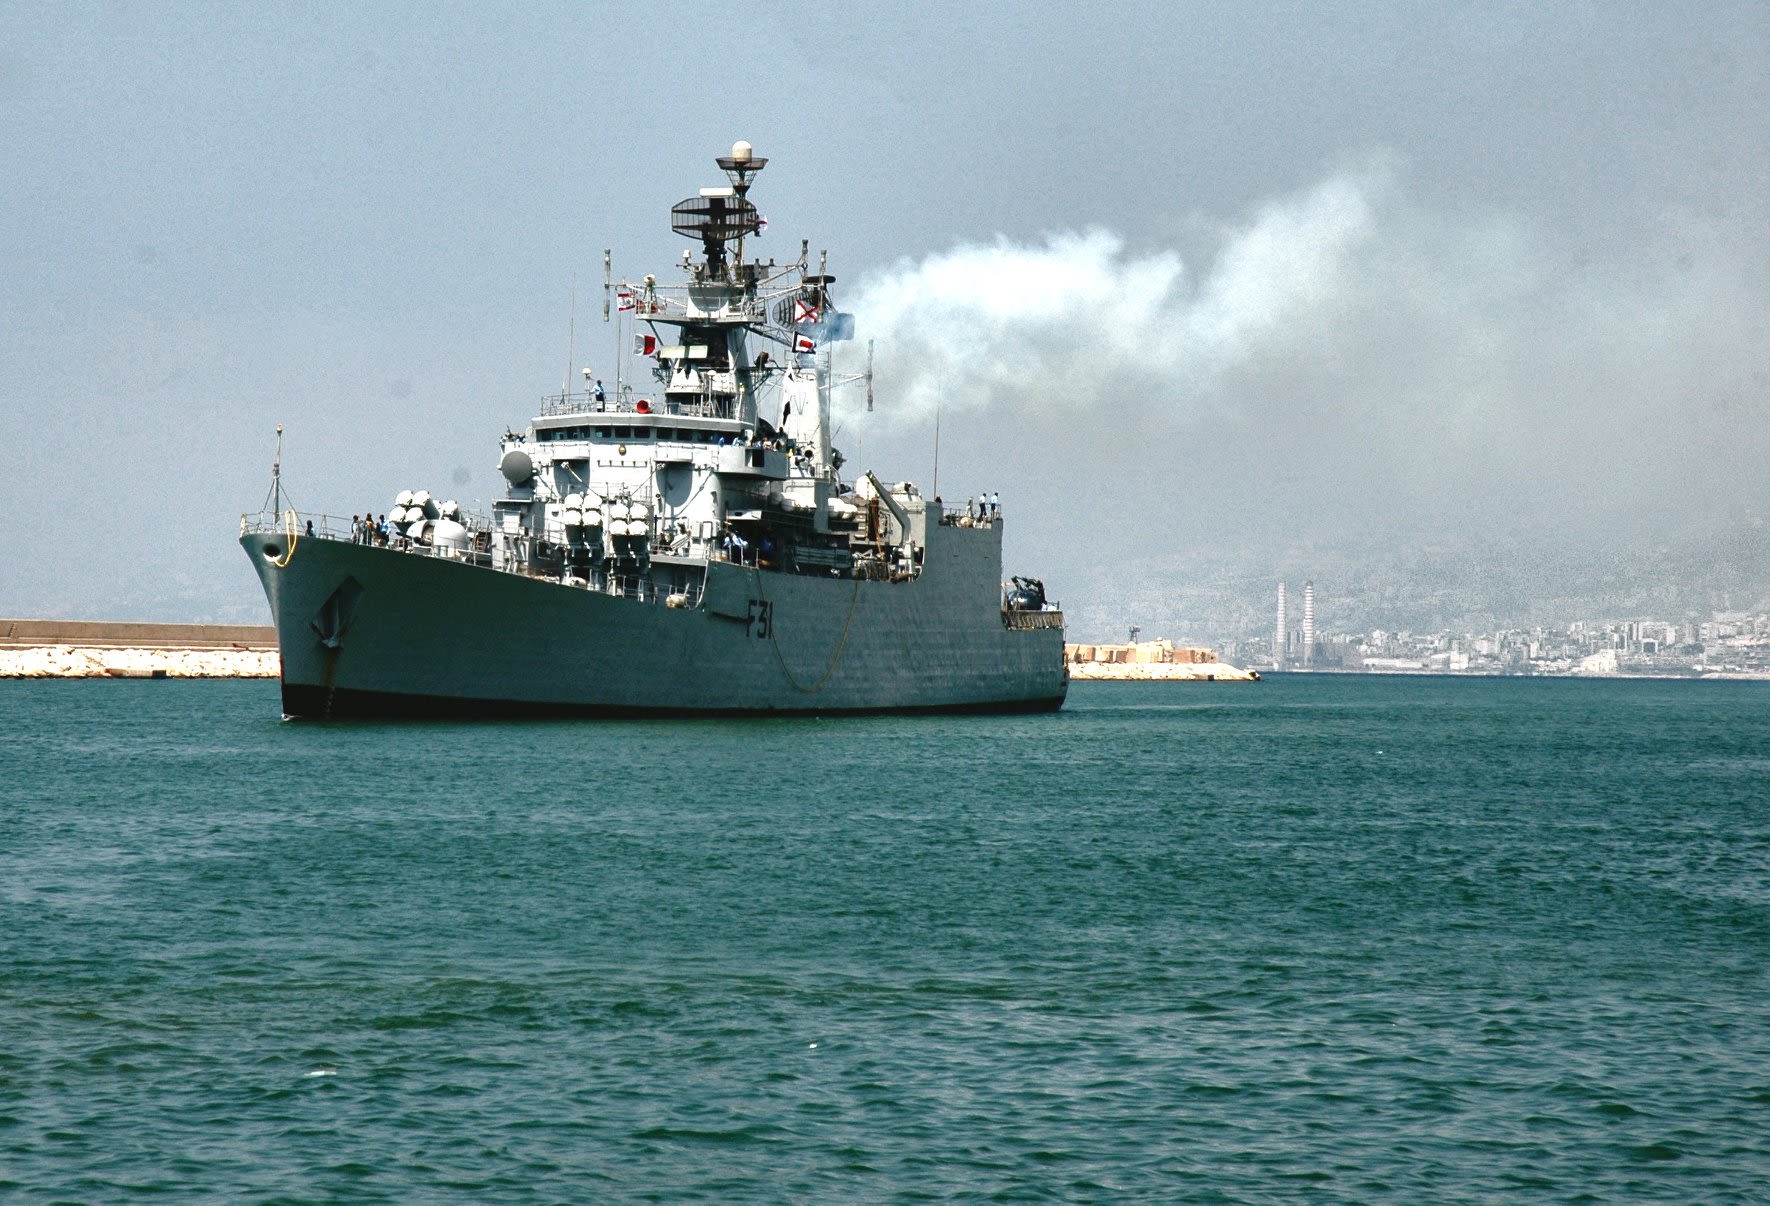 India loses warship after fire and capsize